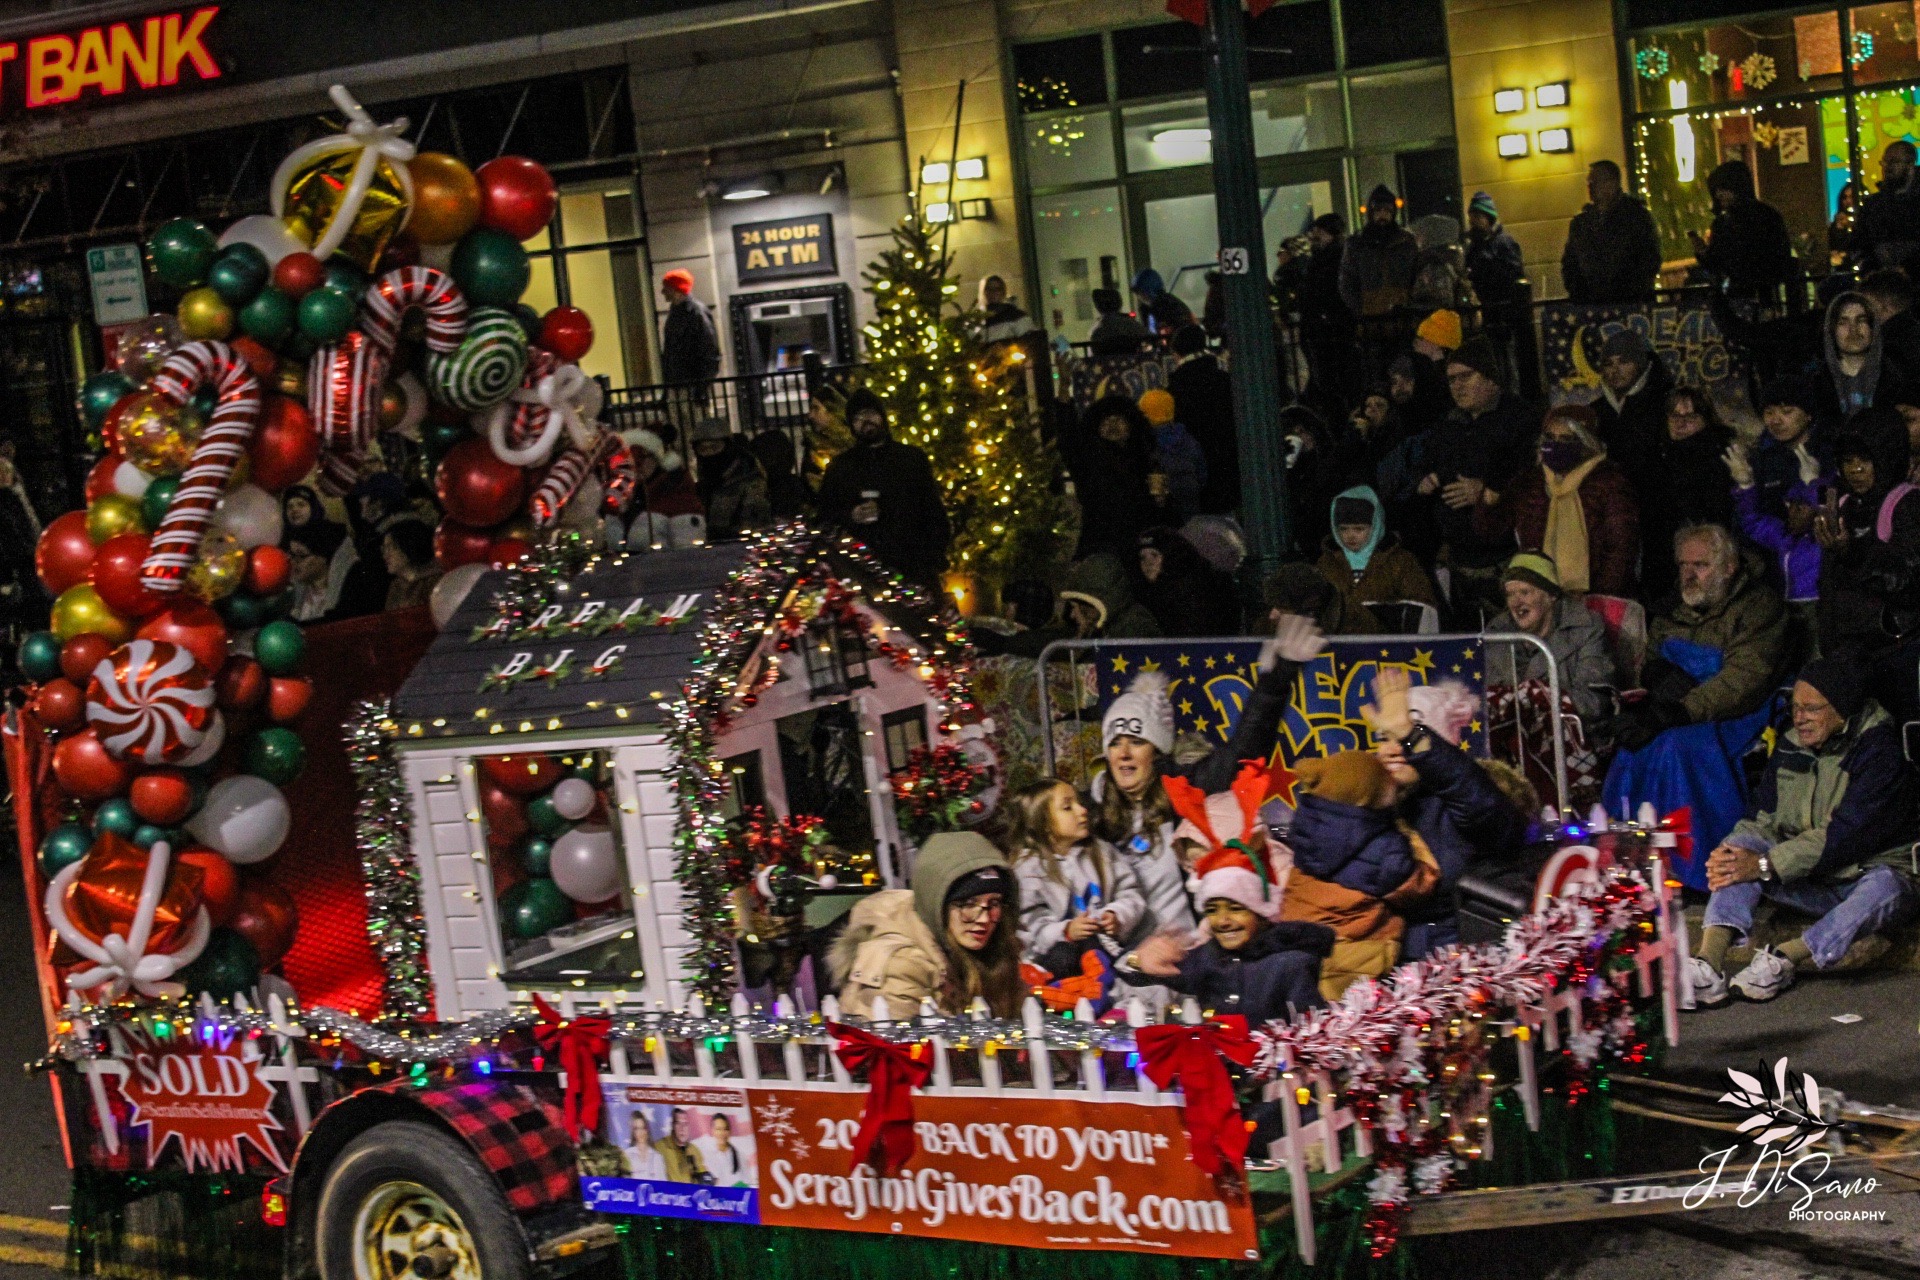 Annual Holiday Parade Presented by the City and County of Schenectady